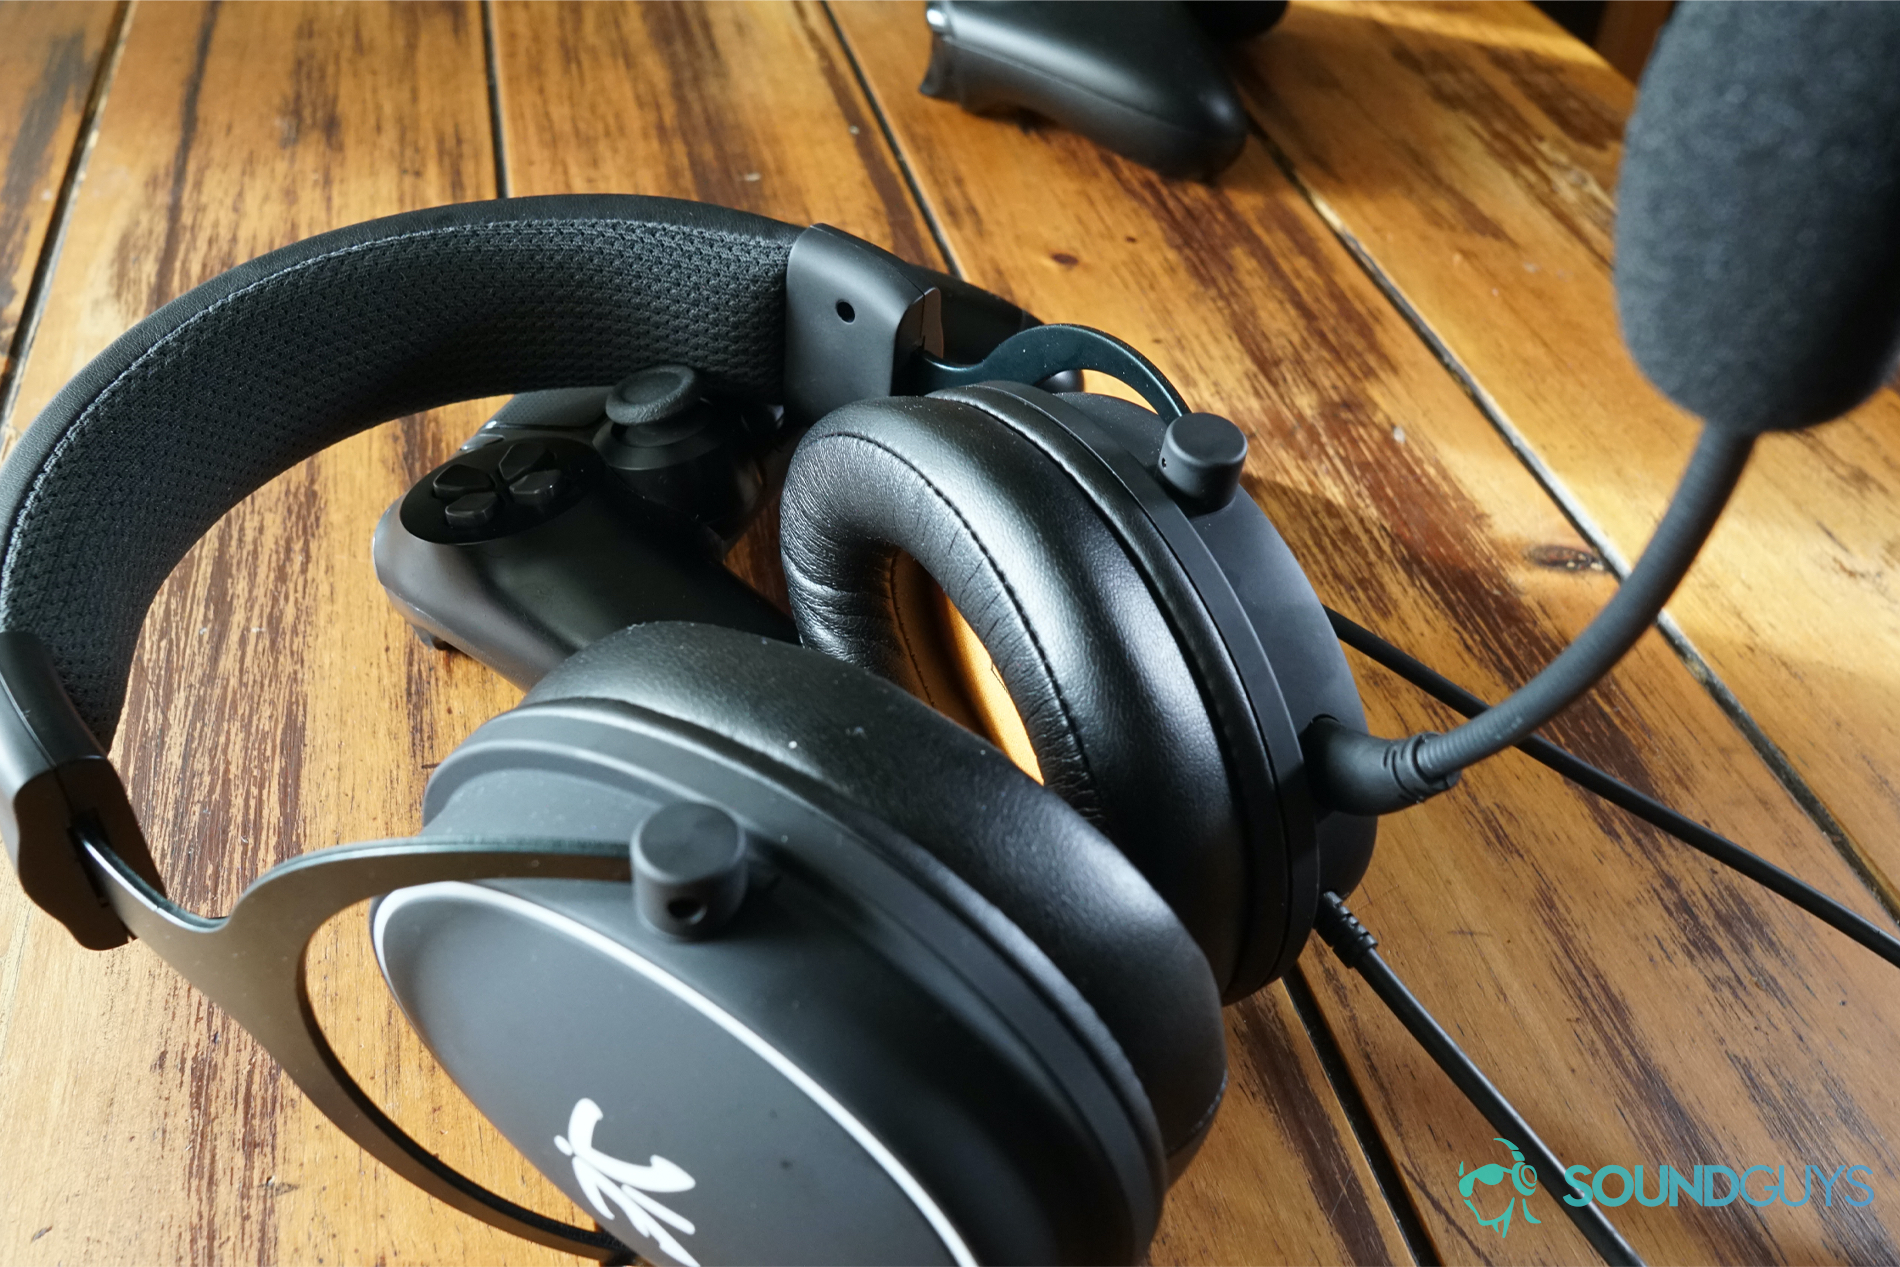 FNATIC GEAR on X: INTRODUCING REACT+ ESPORTS PERFORMANCE GAMING HEADSET  Like the REACT… BUT+ now improved with a powerful XP USB soundcard that  gives a new virtual 7.1 surround sound experience  /